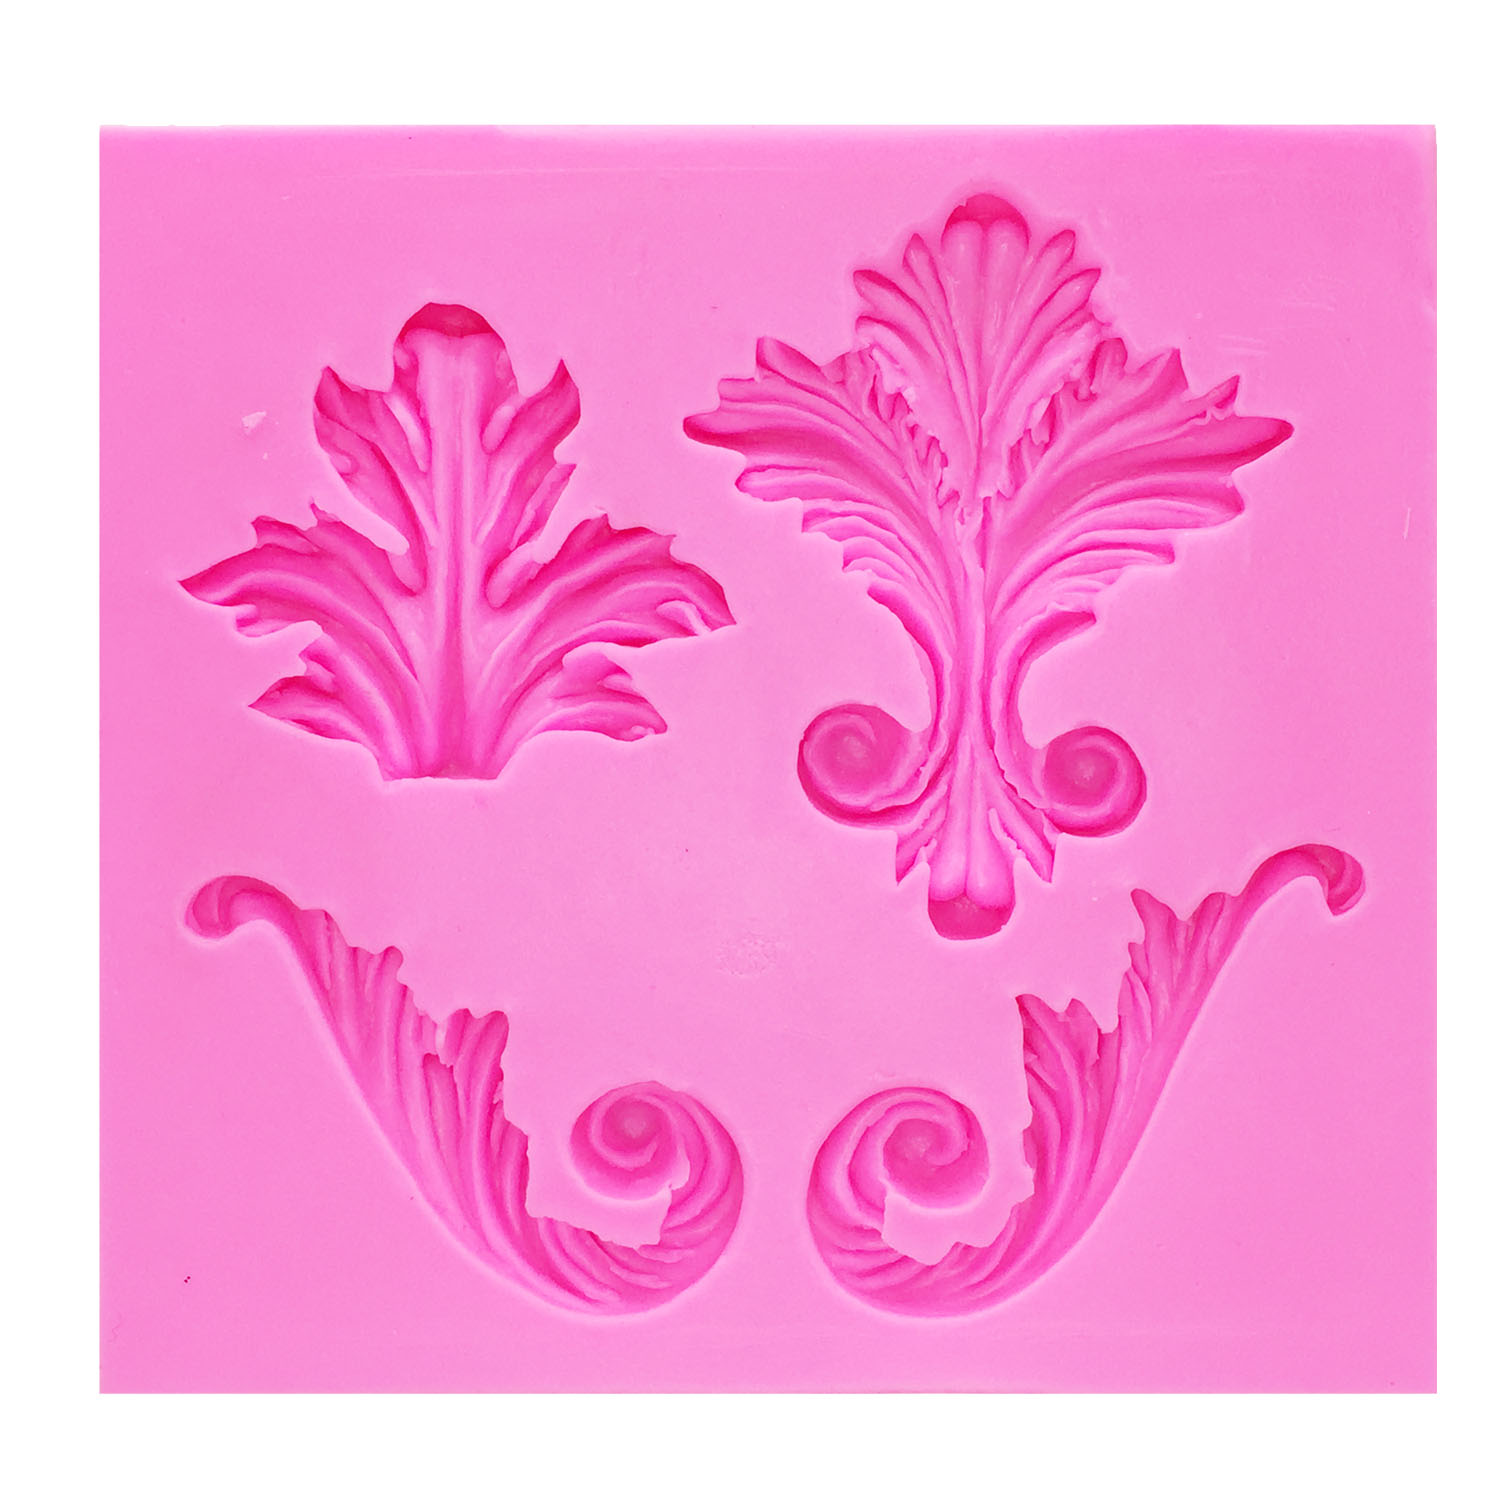 M0735 Retro Lace Leaf Silicone Cake Mold,3D Non-Stick Baking Mould For Chocolate Cookie DIY Fondant Cake Decoration Tools